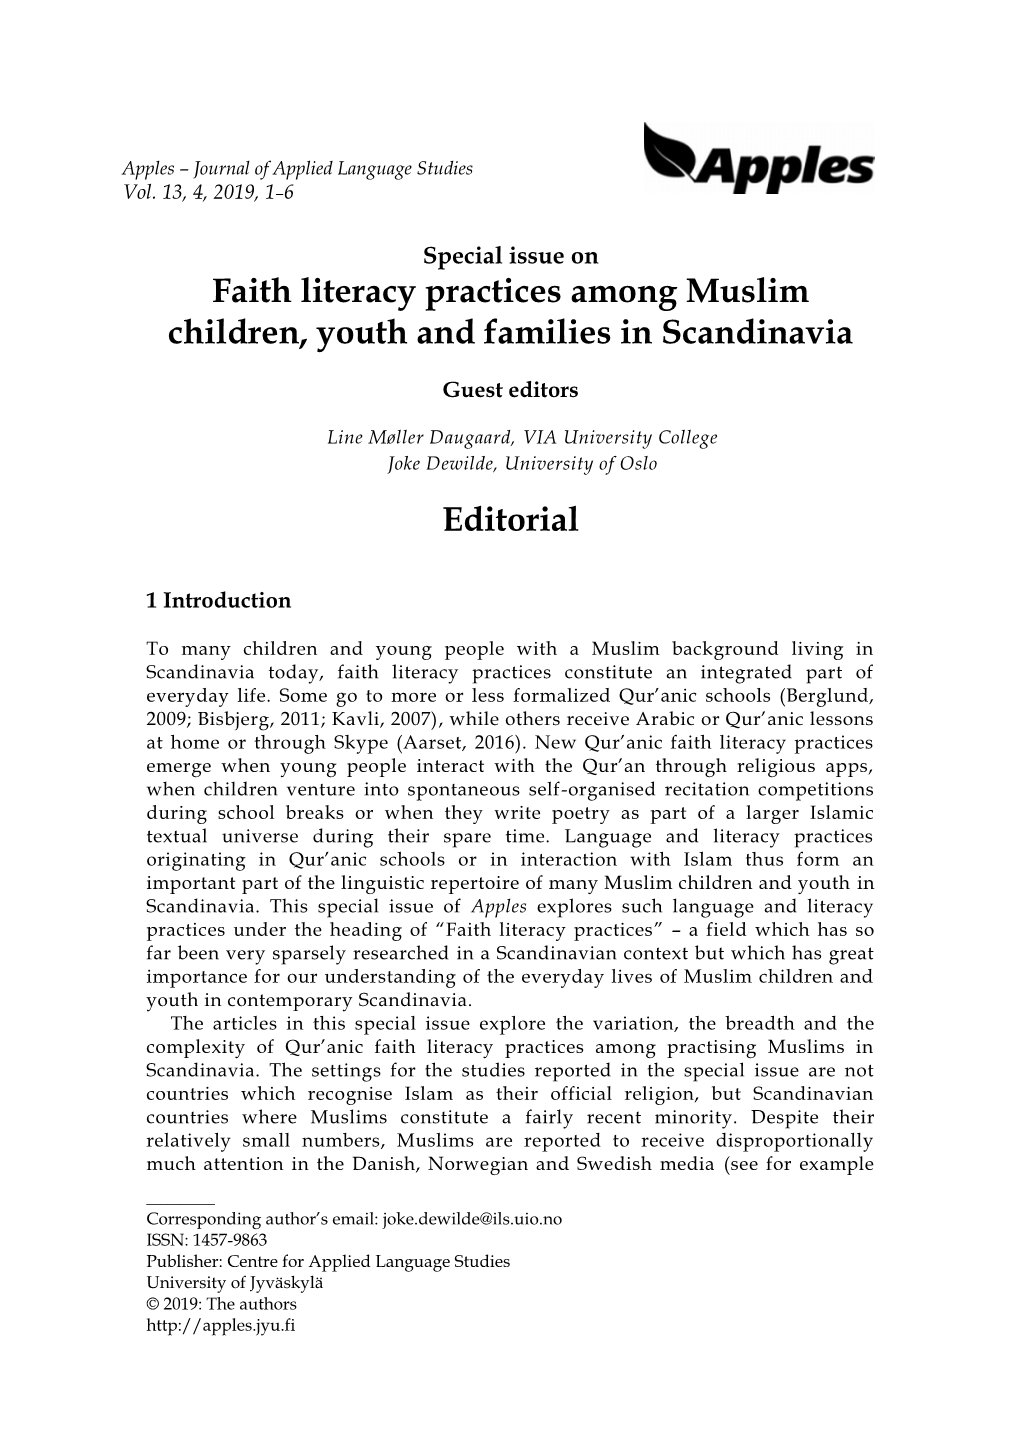 Faith Literacy Practices Among Muslim Children, Youth and Families in Scandinavia Editorial